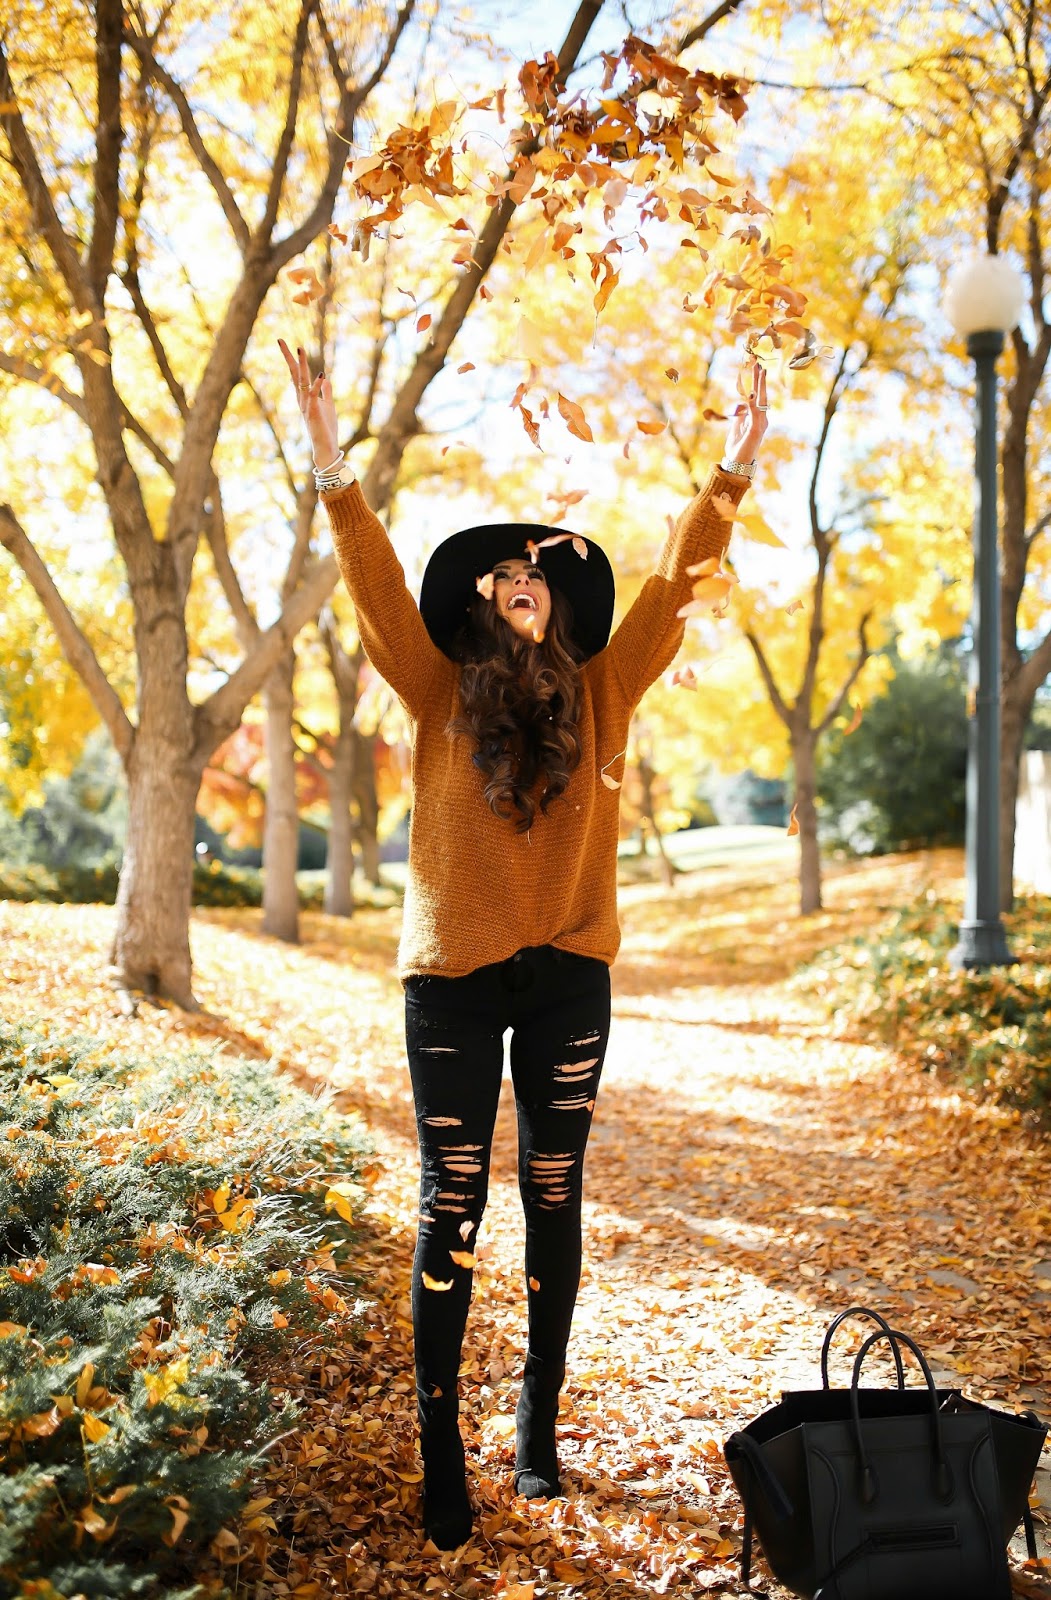 emily gemma, the sweetest thing blog, Fall outfit inspiration 2016, pinterest fall outfit, pinterest fall fashion 2016, pinterest outfits sweaters and floppy hats, how to style floppy hat for fall, best floppy hat for fall, pinterest fall outfits with ripped jeans and sweaters, black celine phantom, Free people sweater, AG jeans black distressed, BCBG booties, black steve madden booties, fall ootd, top fall fashion blogs, denver travel blog, 